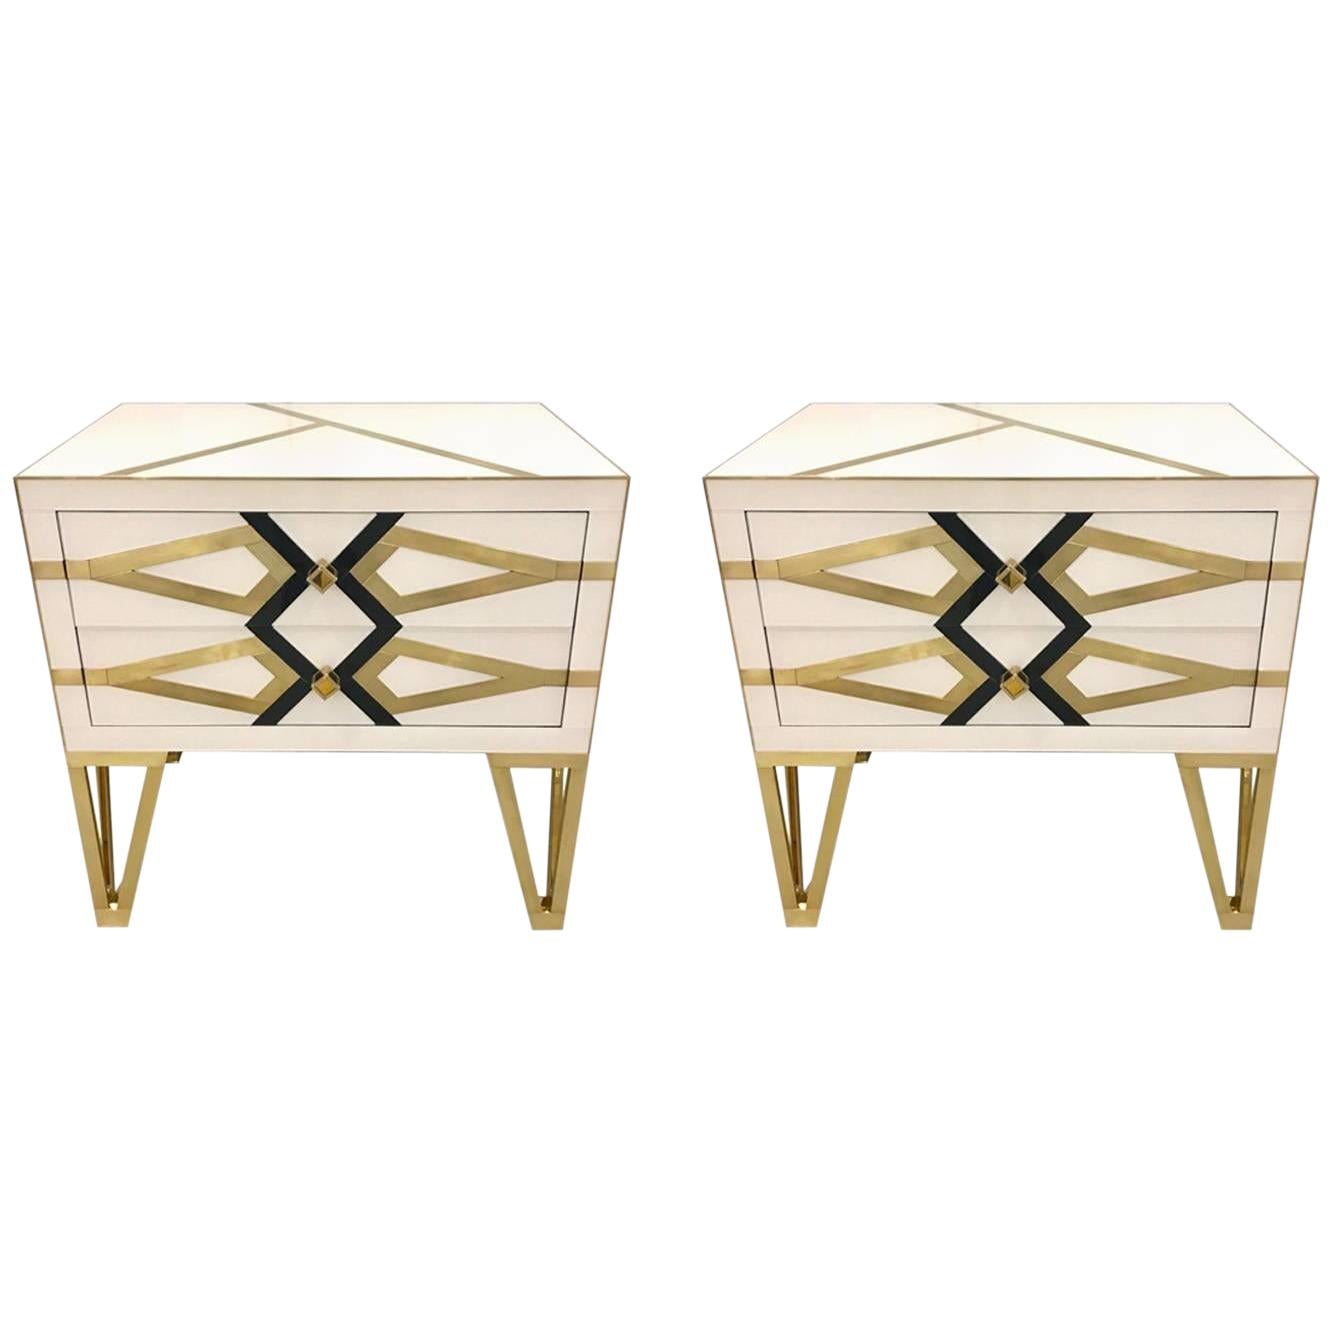 Bespoke Cosulich Creation Gold Brass Black & White Side Tables/Nightstands, Pair For Sale